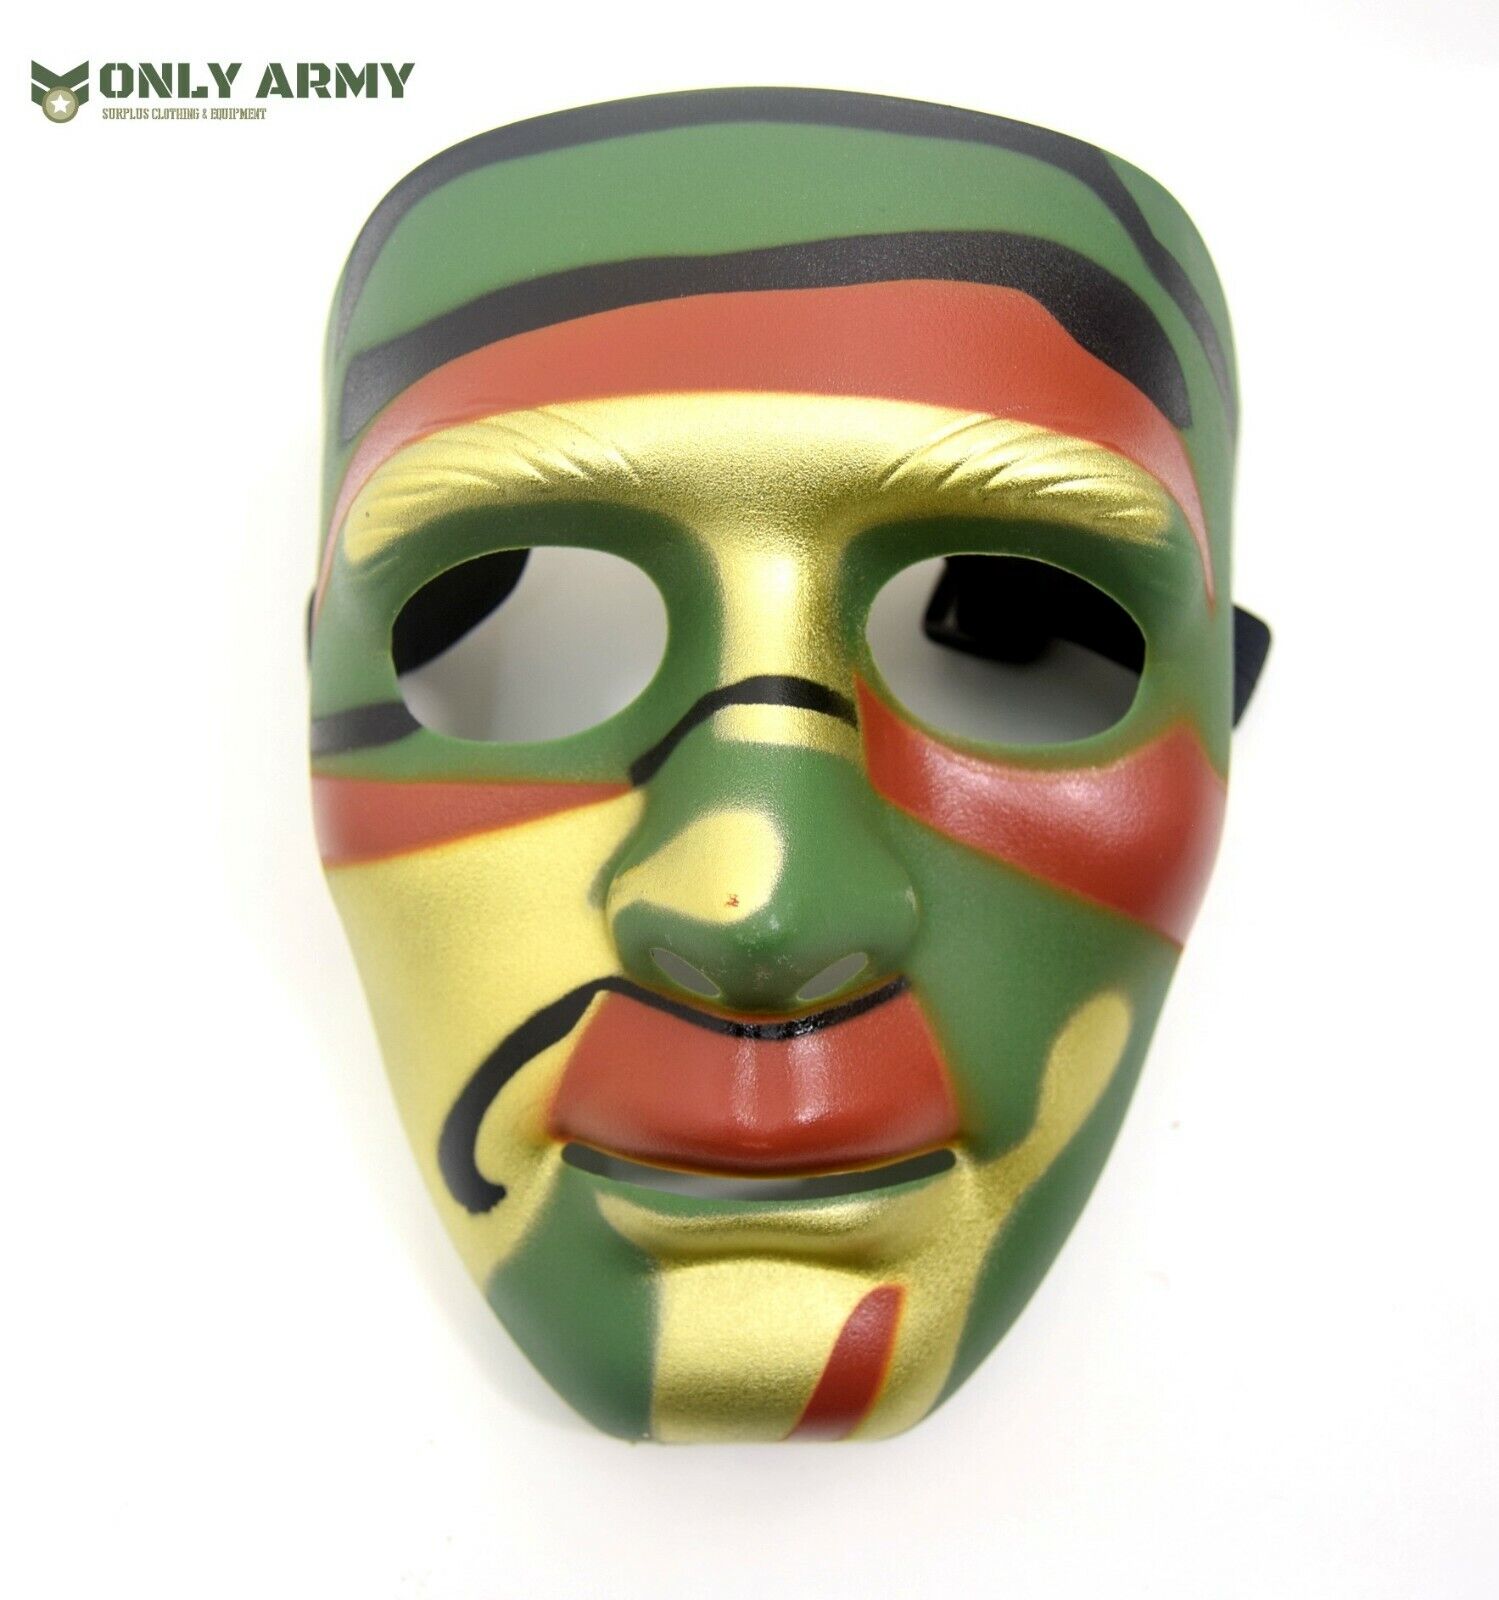 Woodland Camo Protective Full Face Mask Hockey Airsoft Plastic ABS Shield